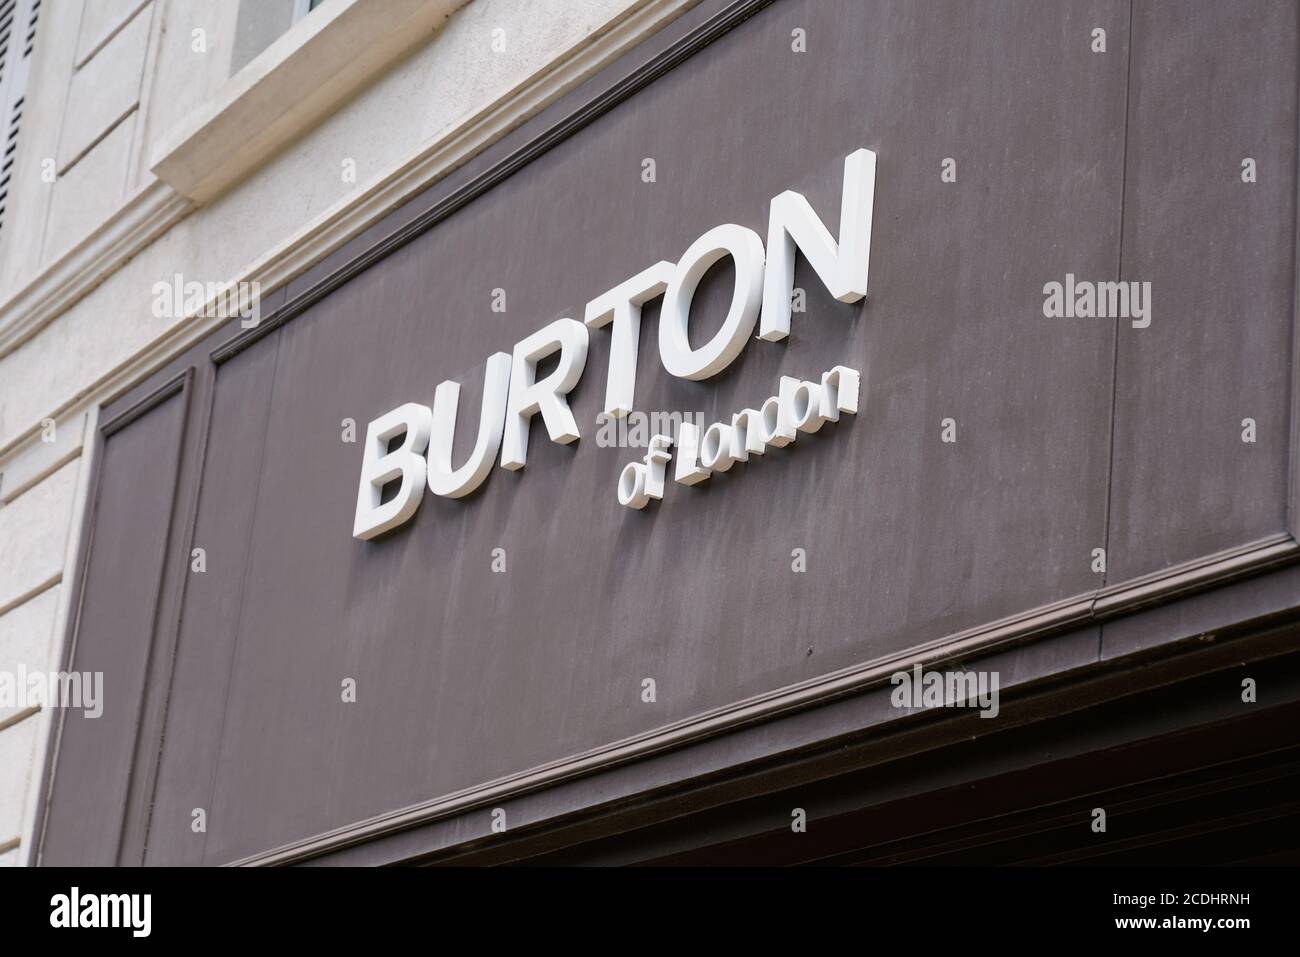 Bordeaux , Aquitaine / France - 08 25 2020 : Burton of london sign text and logo front of entrance fashion urban clothing shop Stock Photo